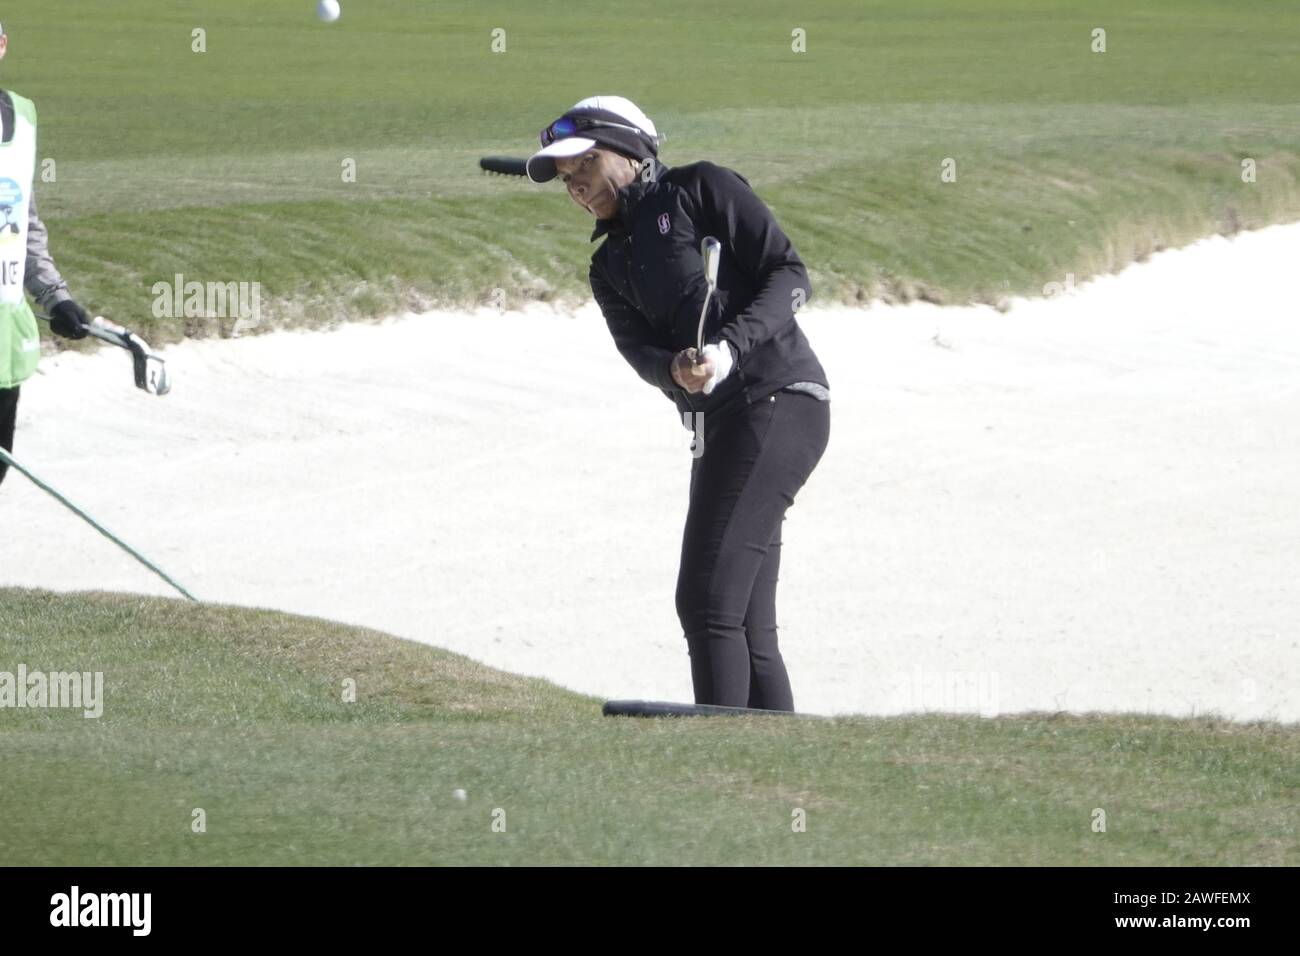 Pebble Beach, USA. 08th Feb, 2020. Monterey, California, USA February 7th  2020 Condoleezza Rice, ex Secretary of State in the waste bunker on the  third day of the AT&T Pro-Am PGA Golf